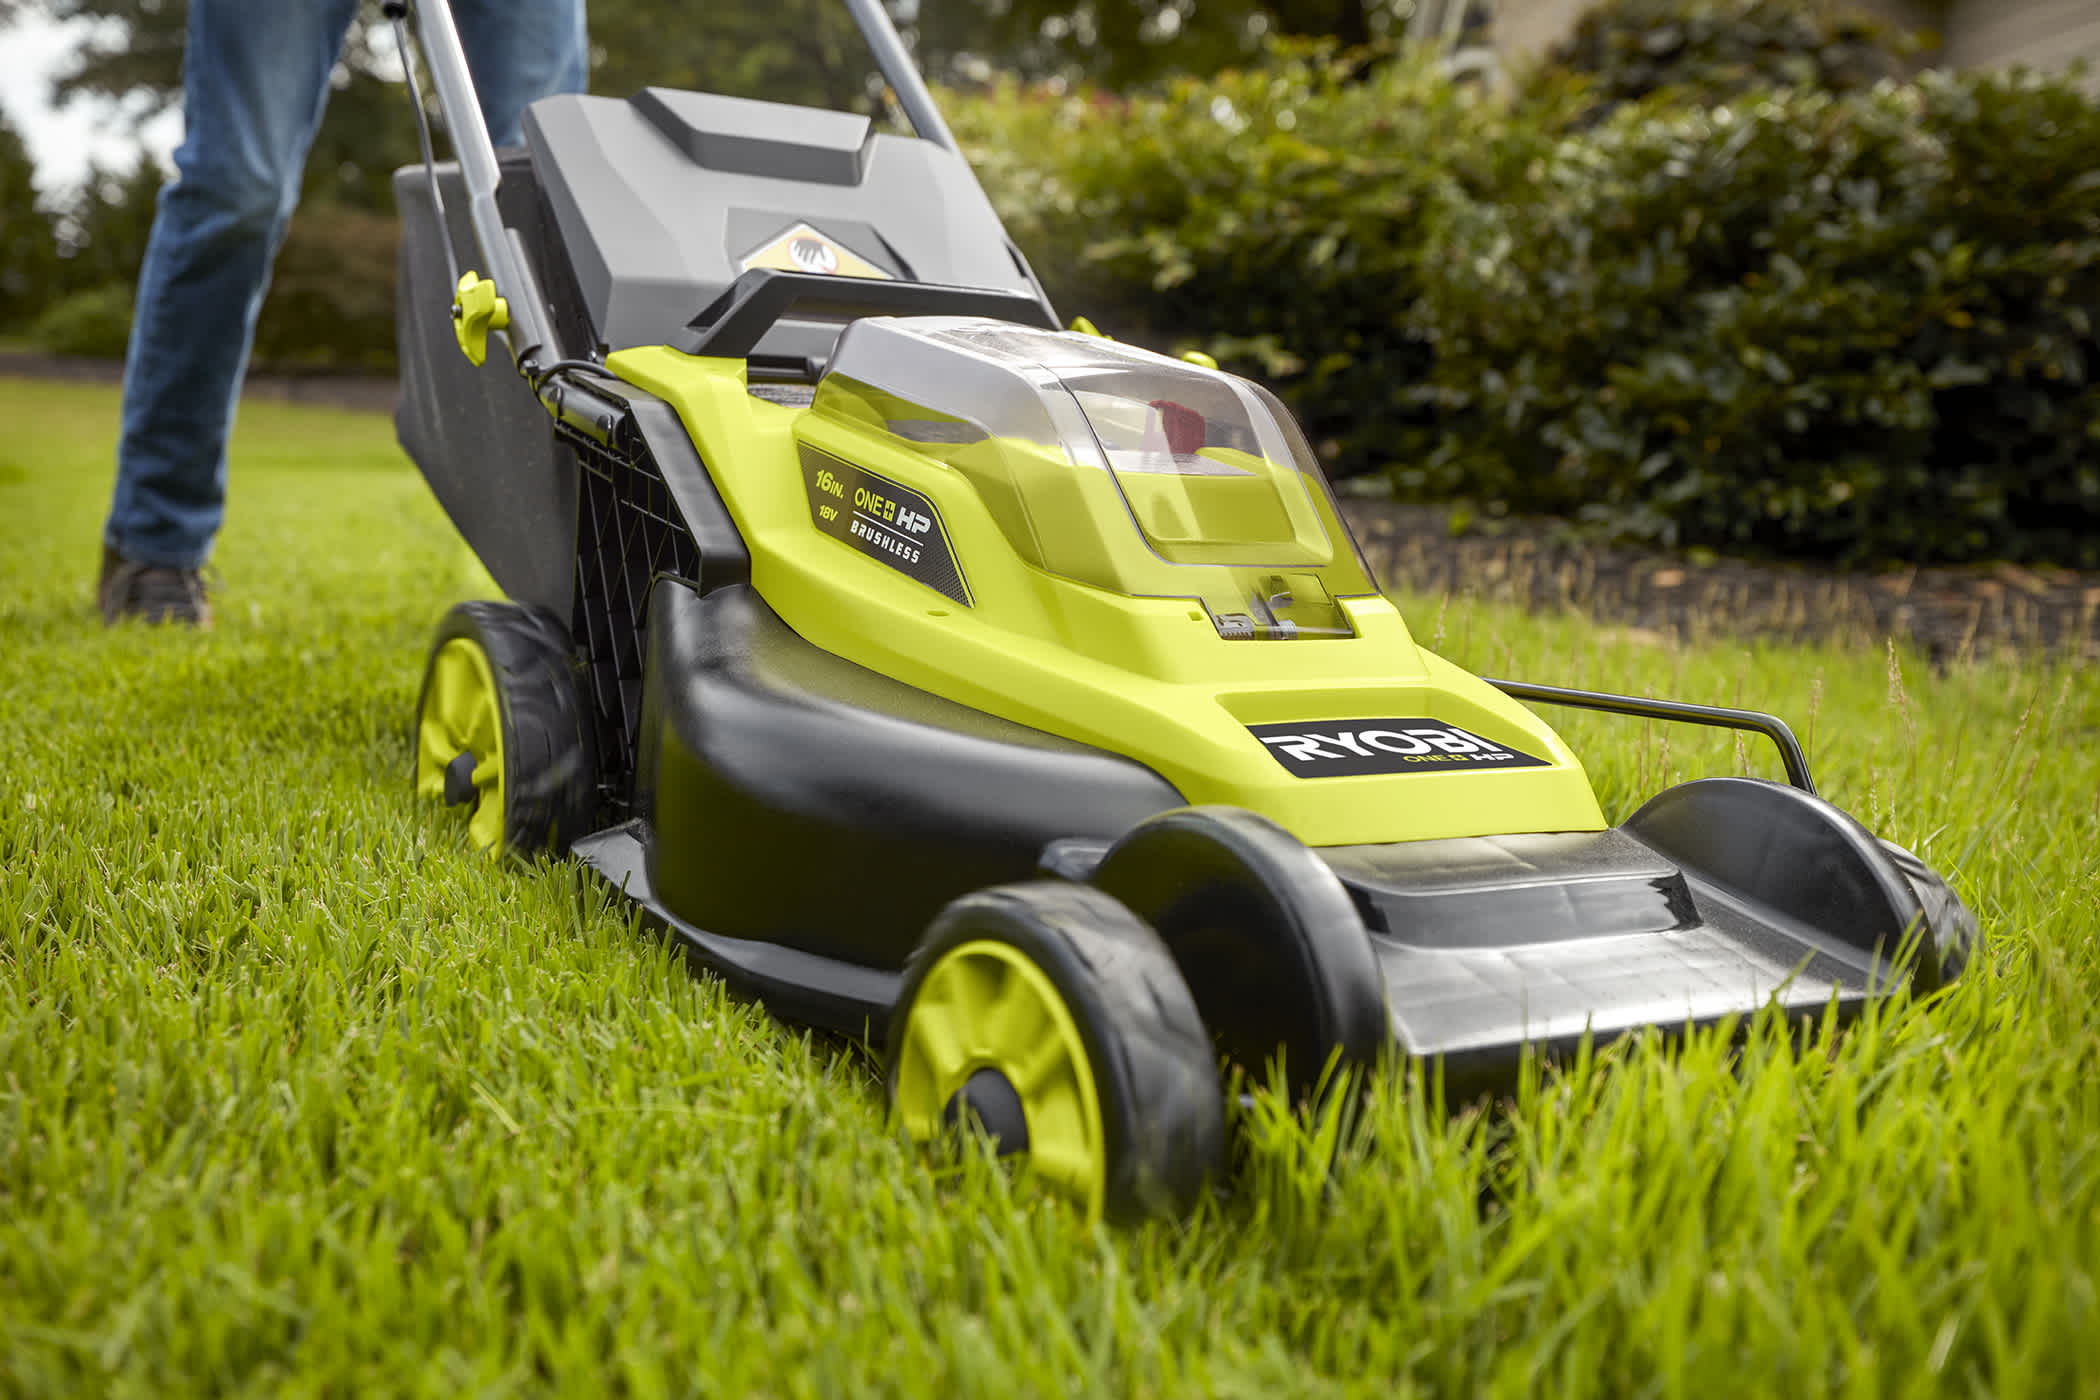 Product Features Image for 18V ONE+ HP Brushless Cordless 16-inch Walk-Behind Push Lawn Mower.